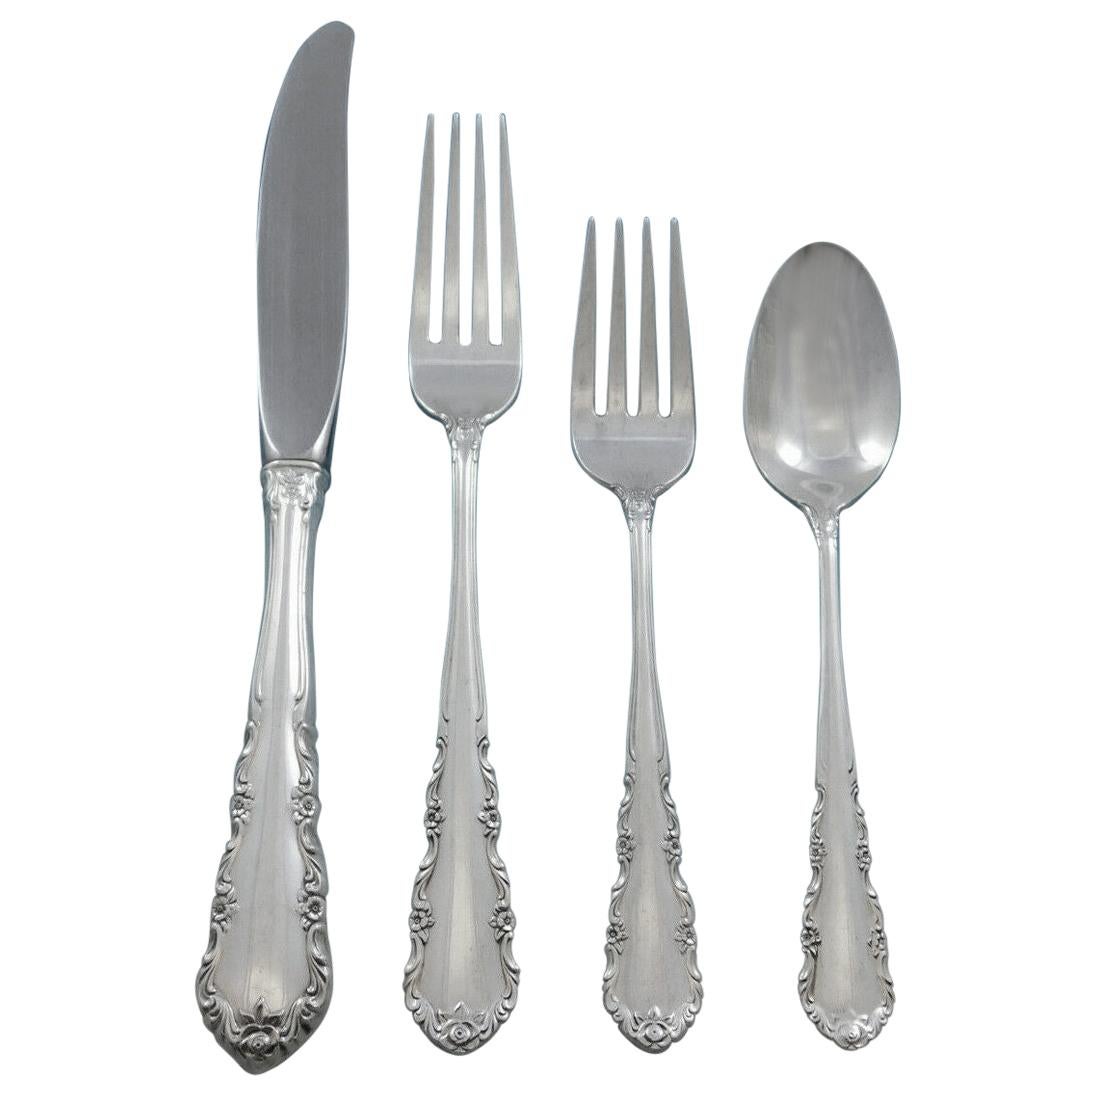 Shenandoah by Wallace Sterling Silver Flatware Set for 8 Service 32 pieces